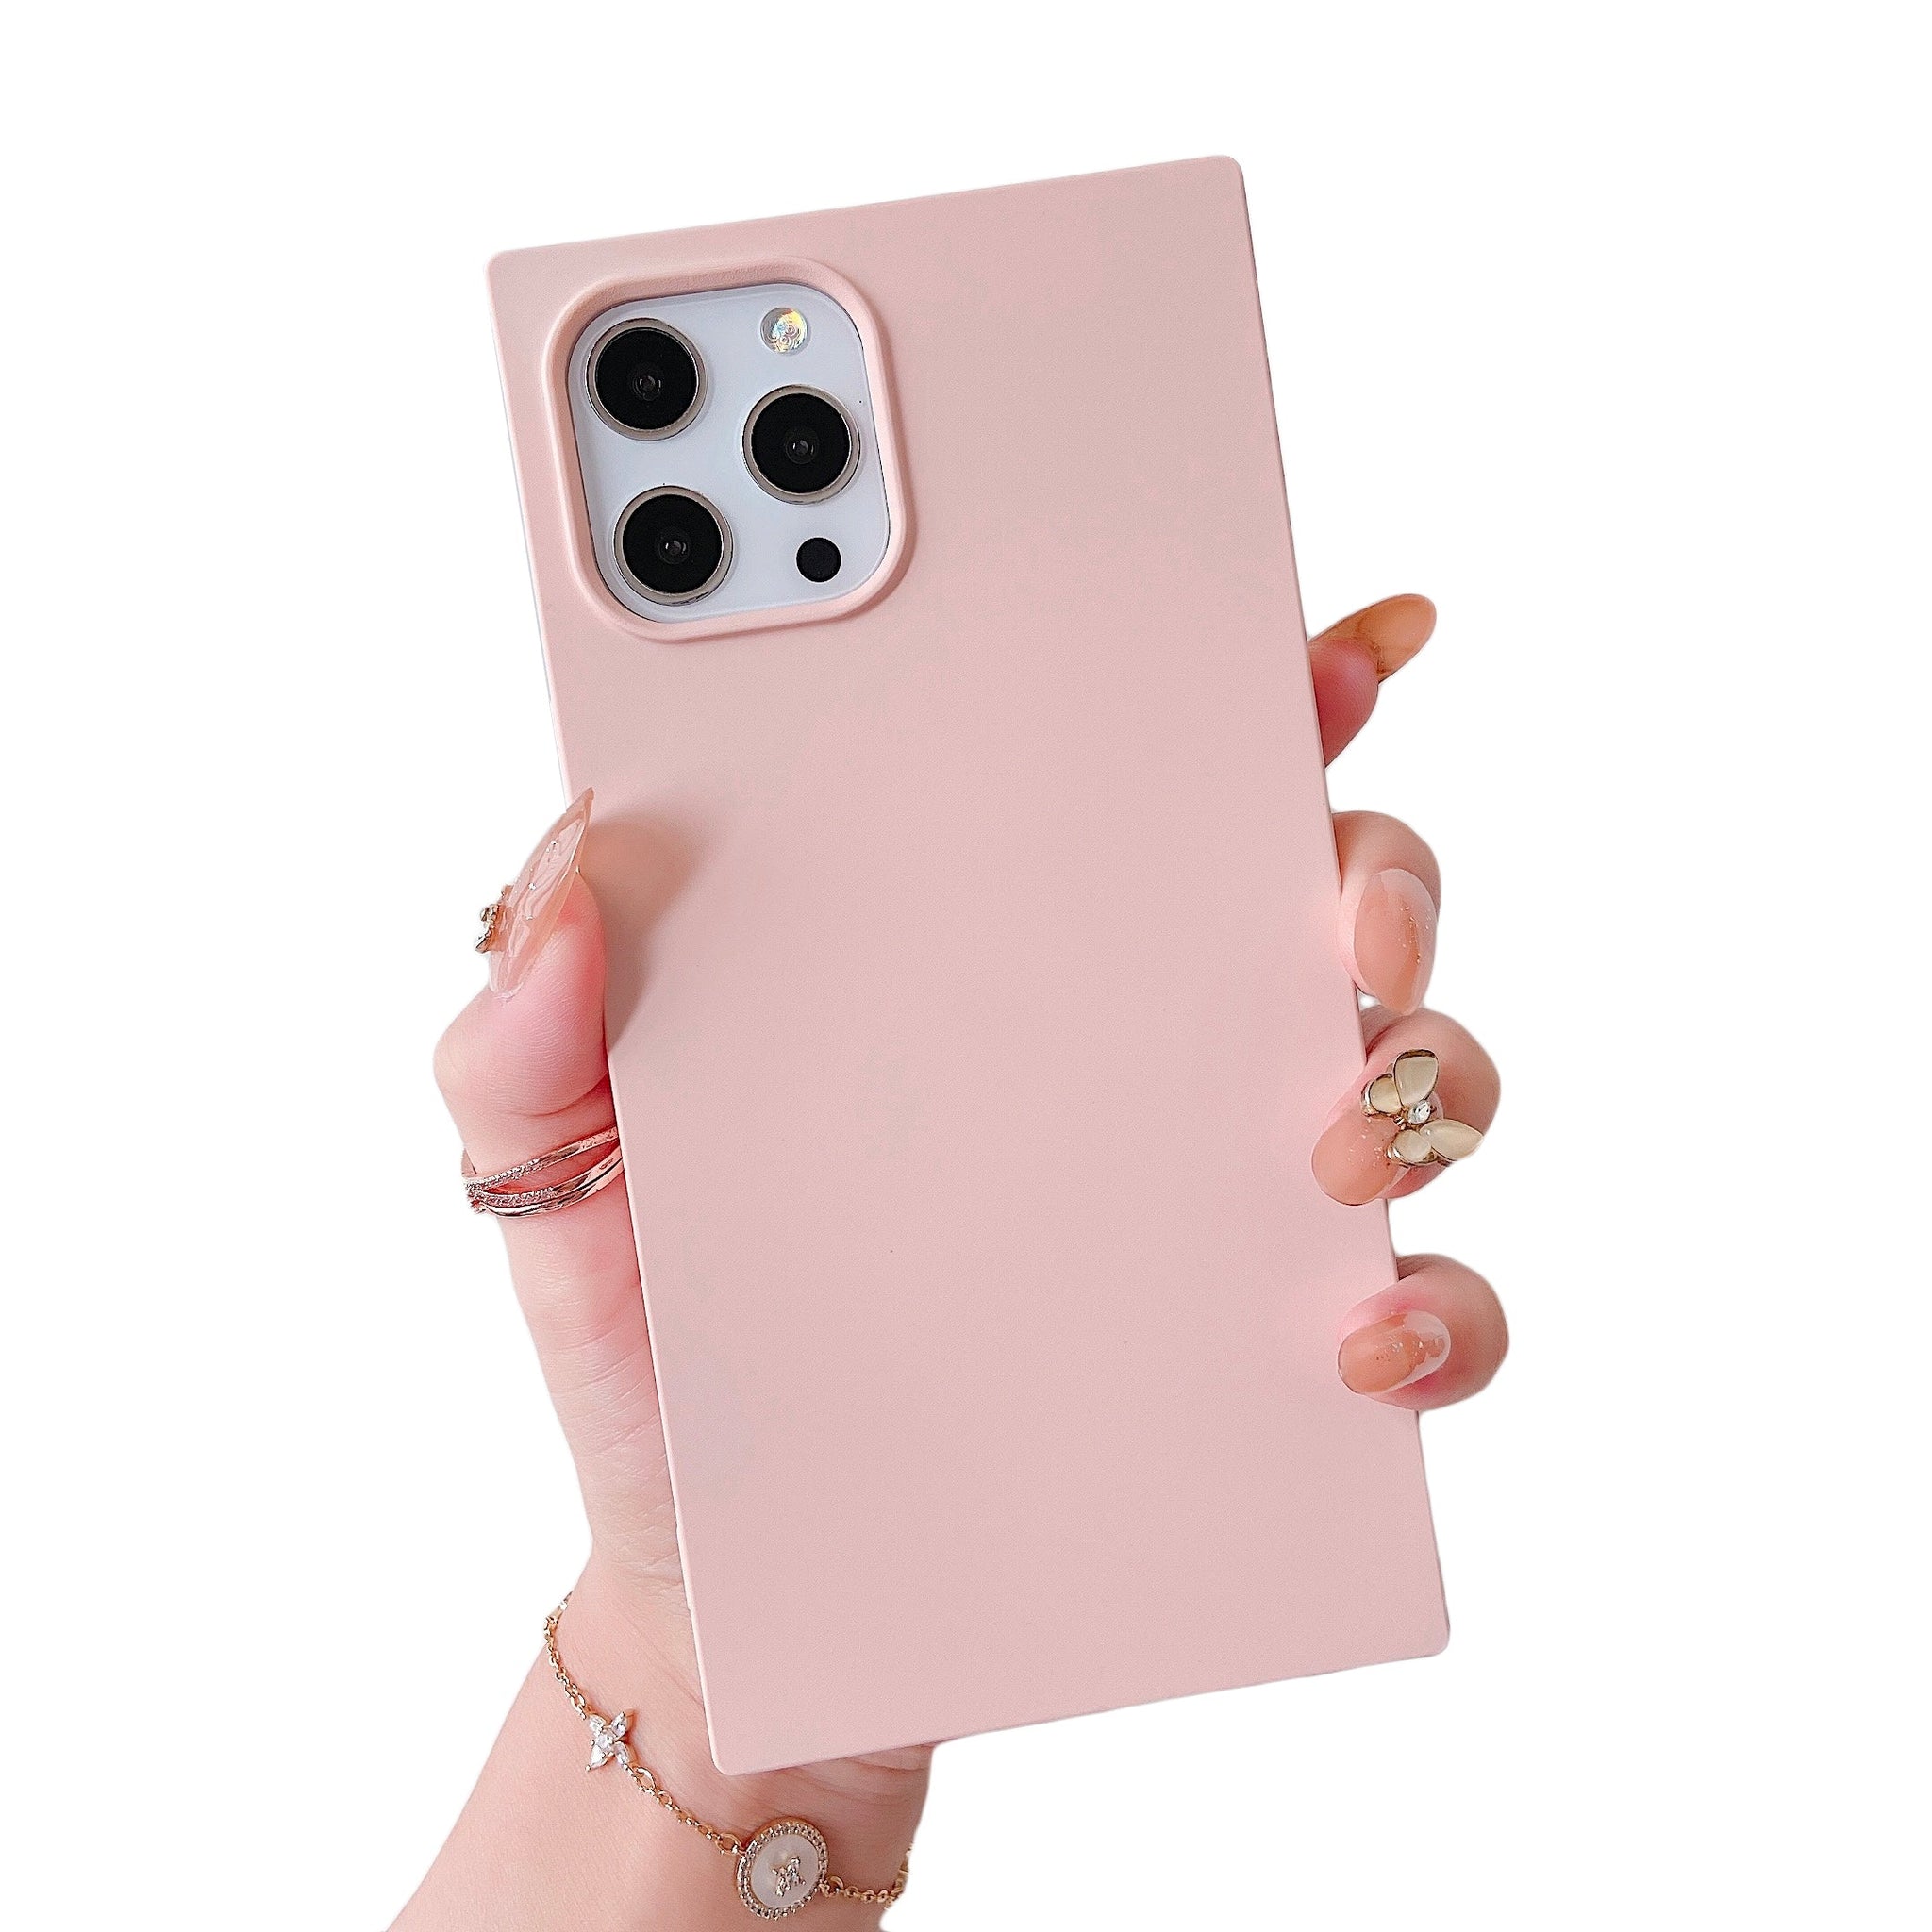 iPhone 12 Pro Max Case Square Silicone (Chalk Pink)